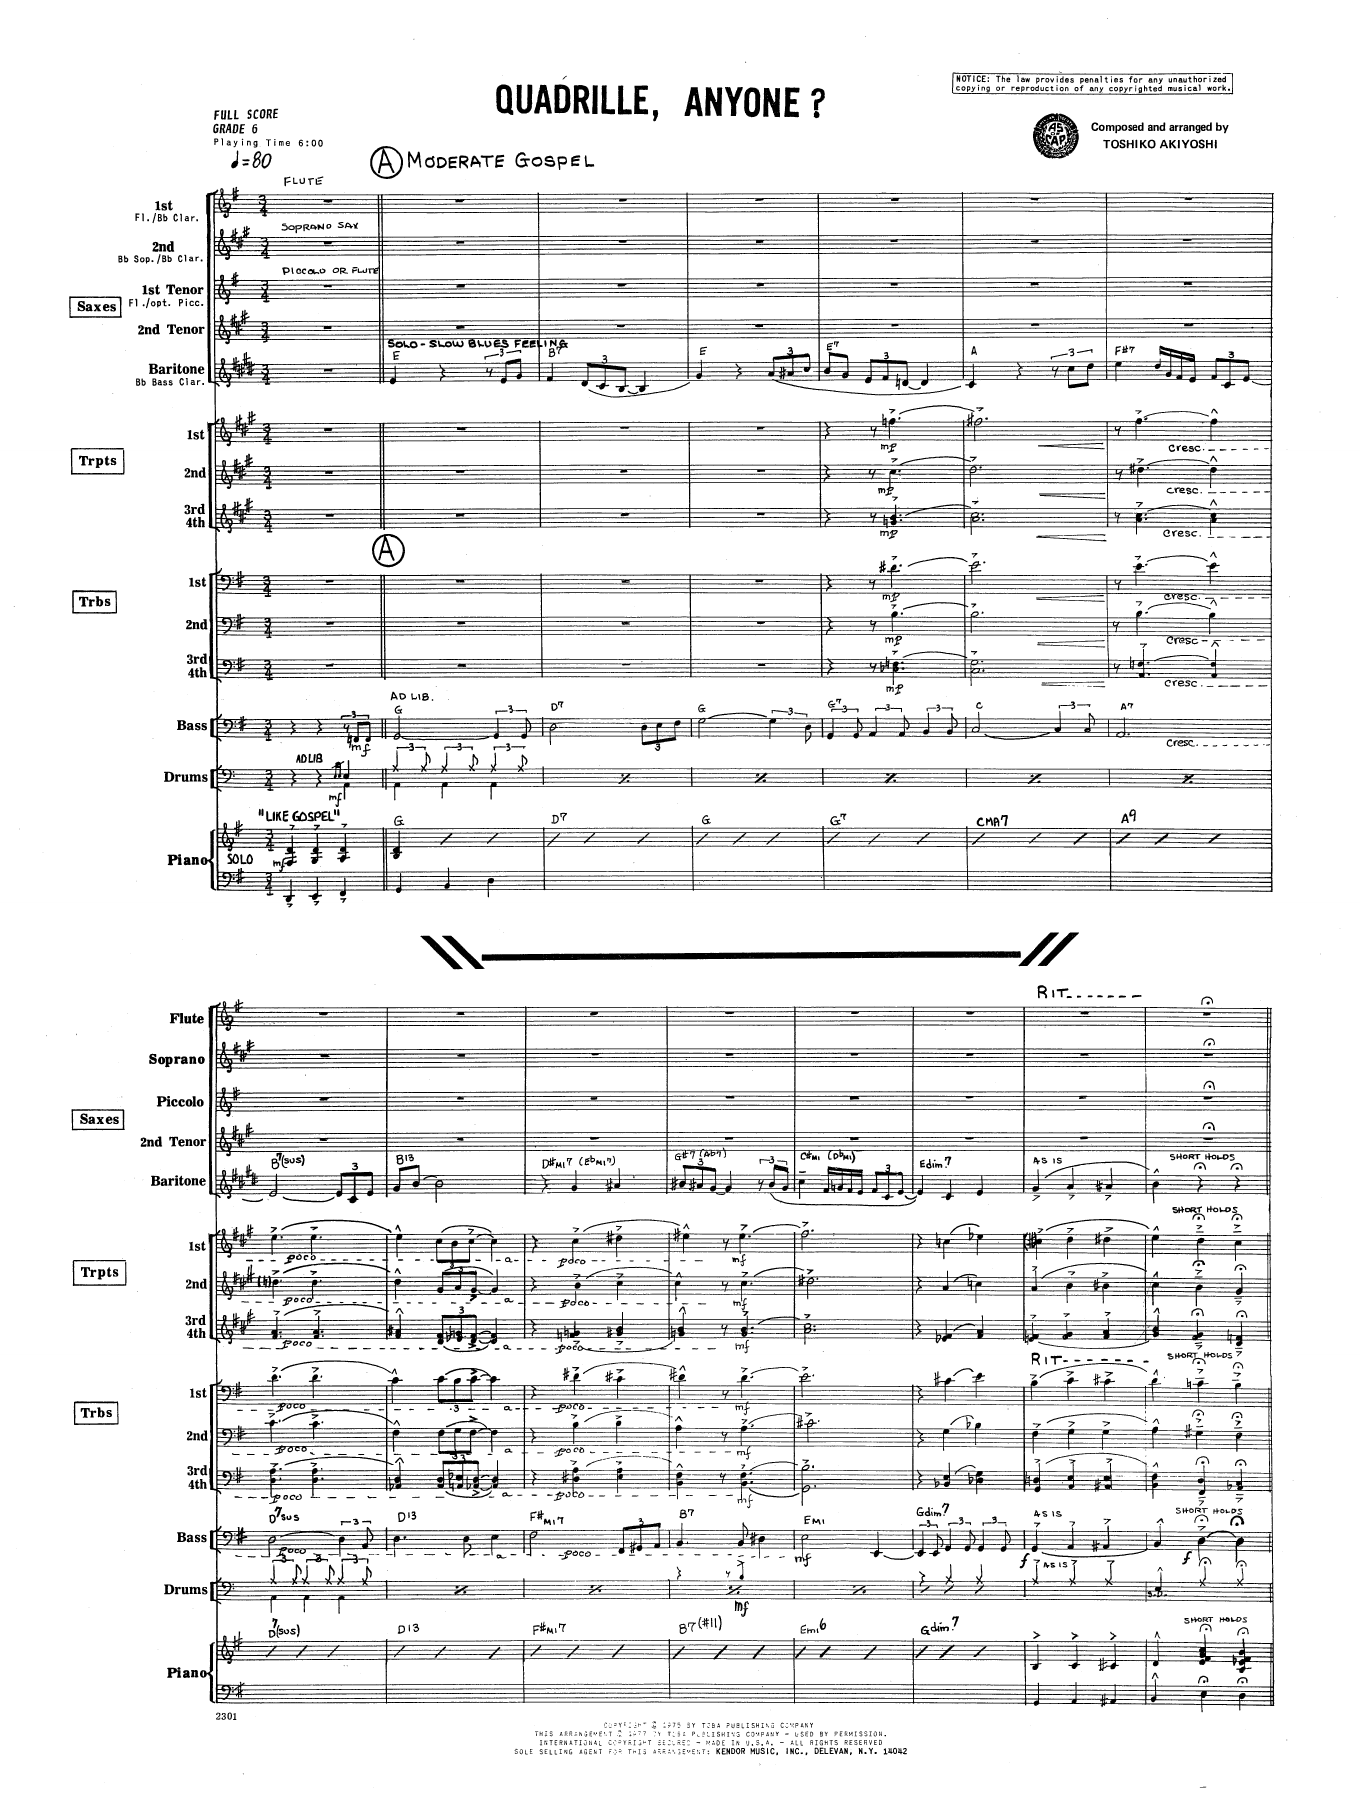 Toshiko Akiyoshi Quadrille, Anyone? - Full Score sheet music preview music notes and score for Jazz Ensemble including 12 page(s)